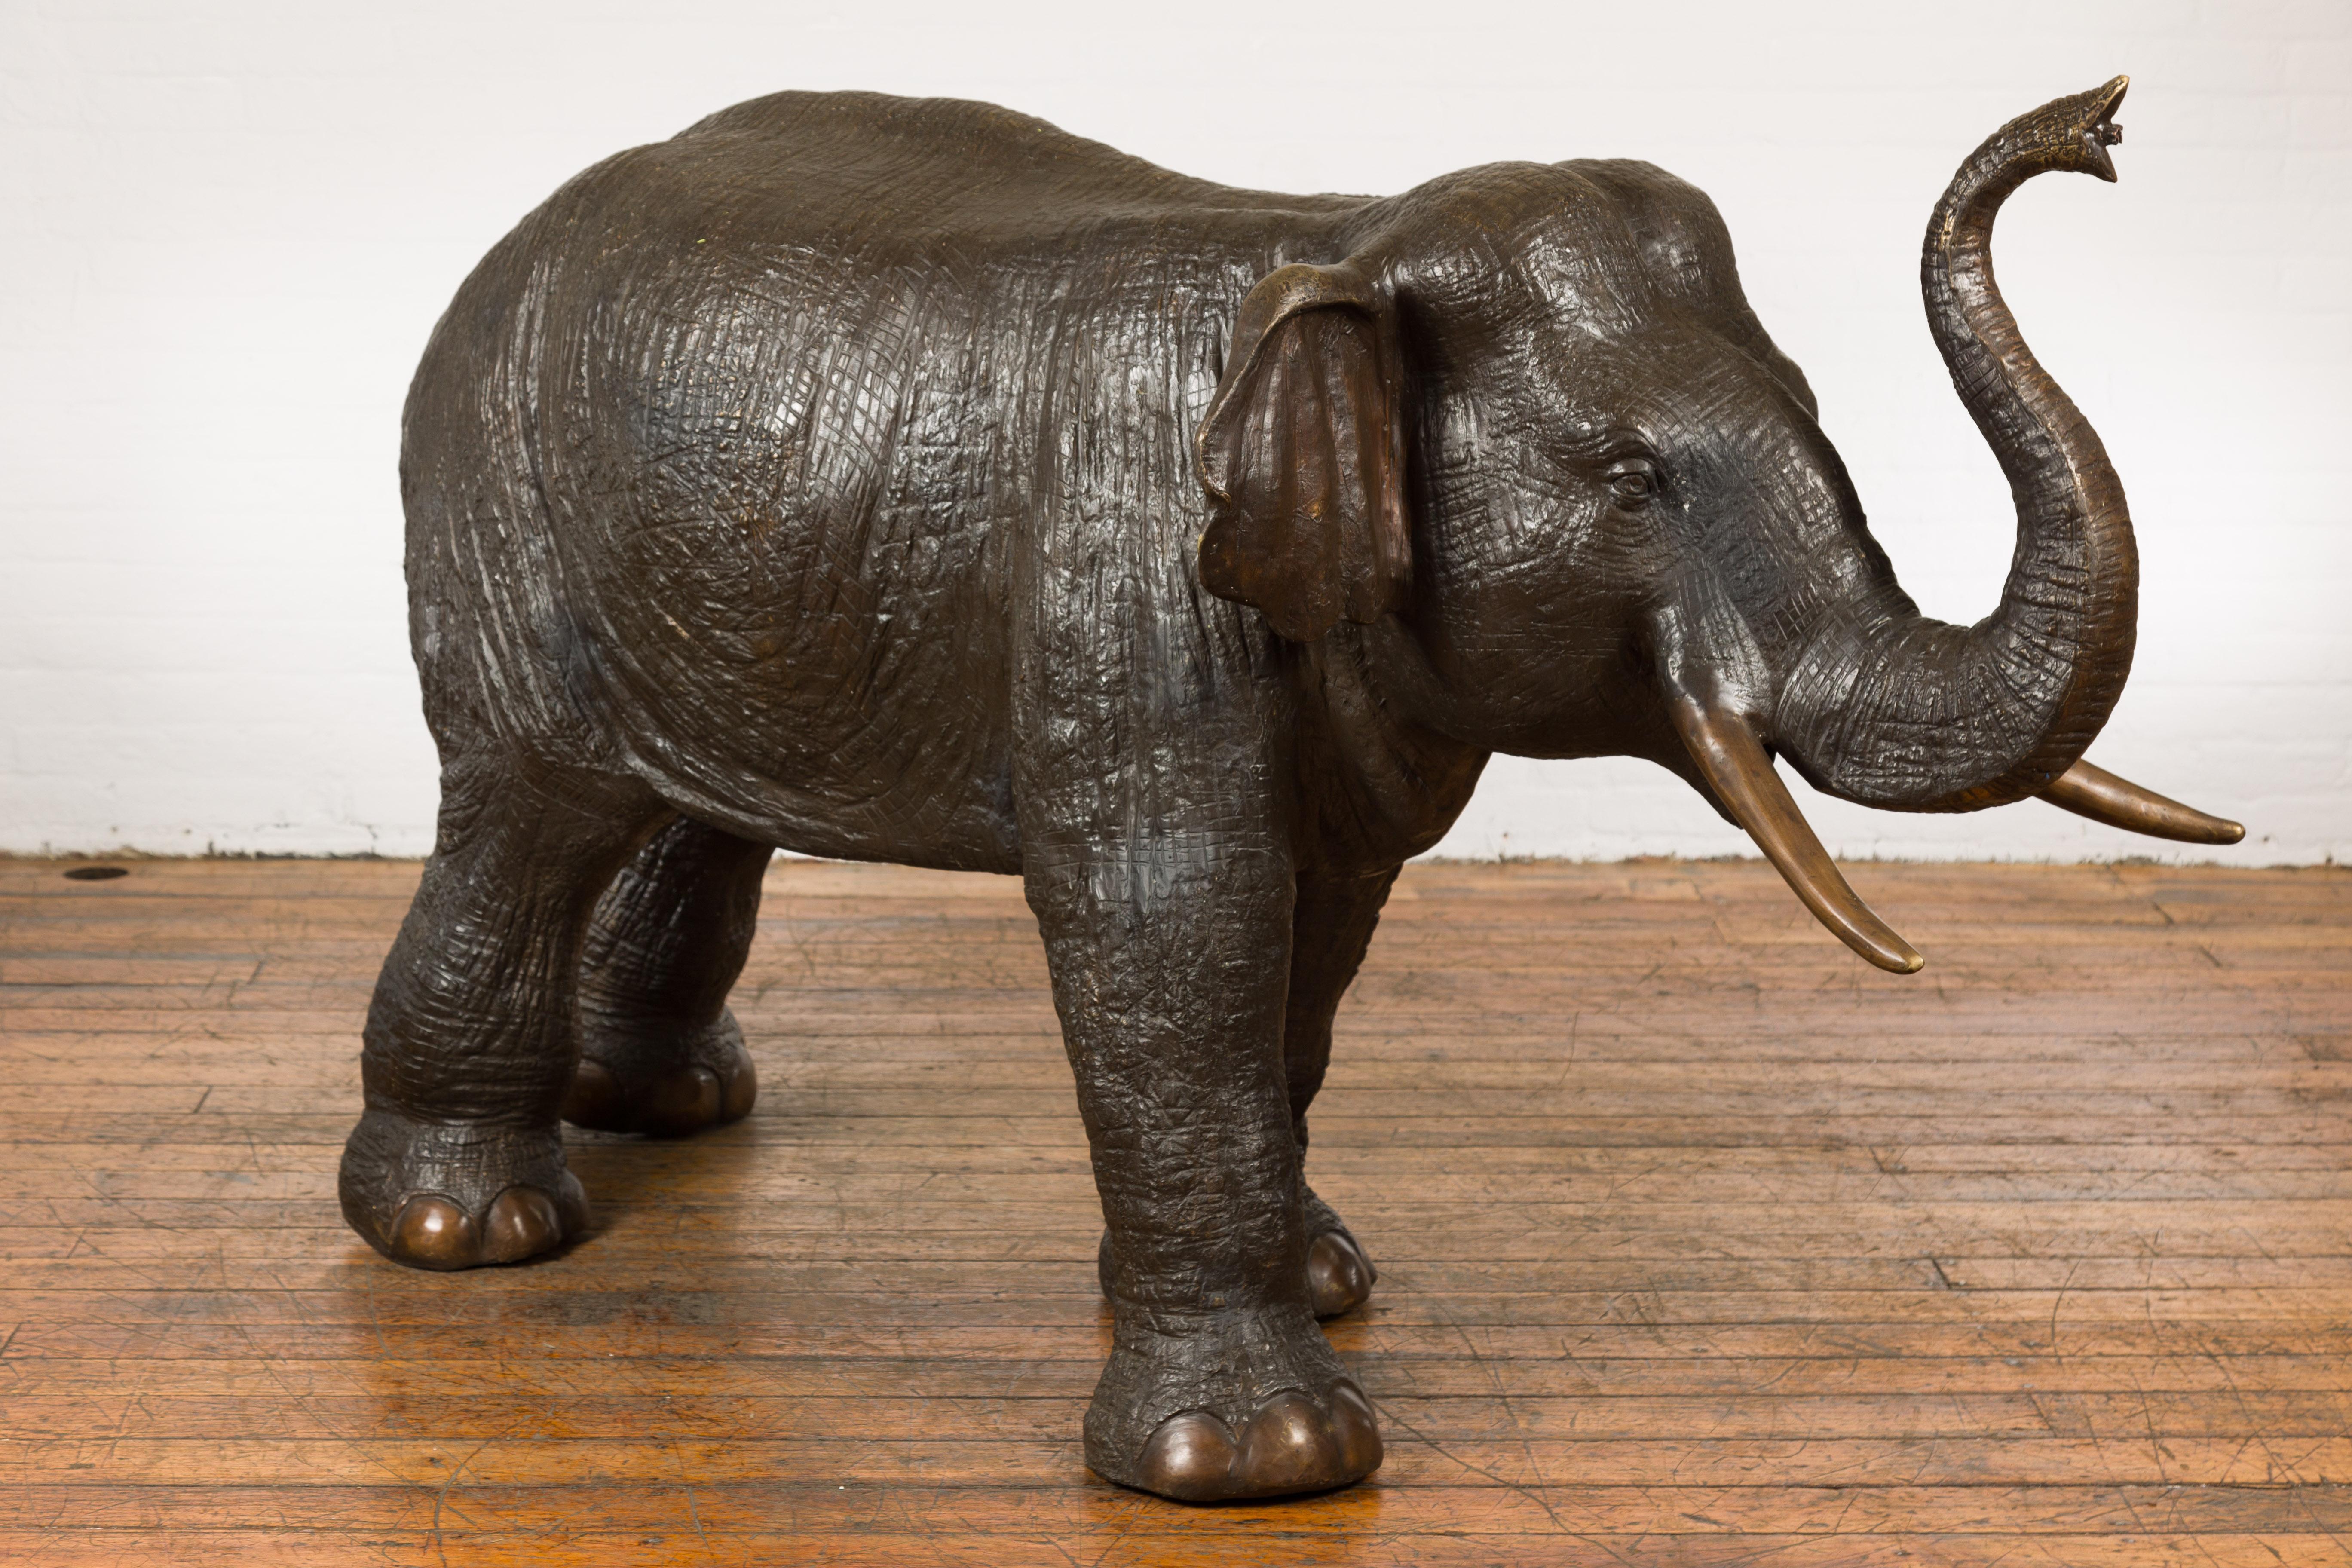 A substantial bronze elephant sculpture tubed as a fountain, made with the lost wax process. Elevate your decor with this remarkable bronze elephant garden sculpture, uniquely designed to function as a fountain. Meticulously crafted using the